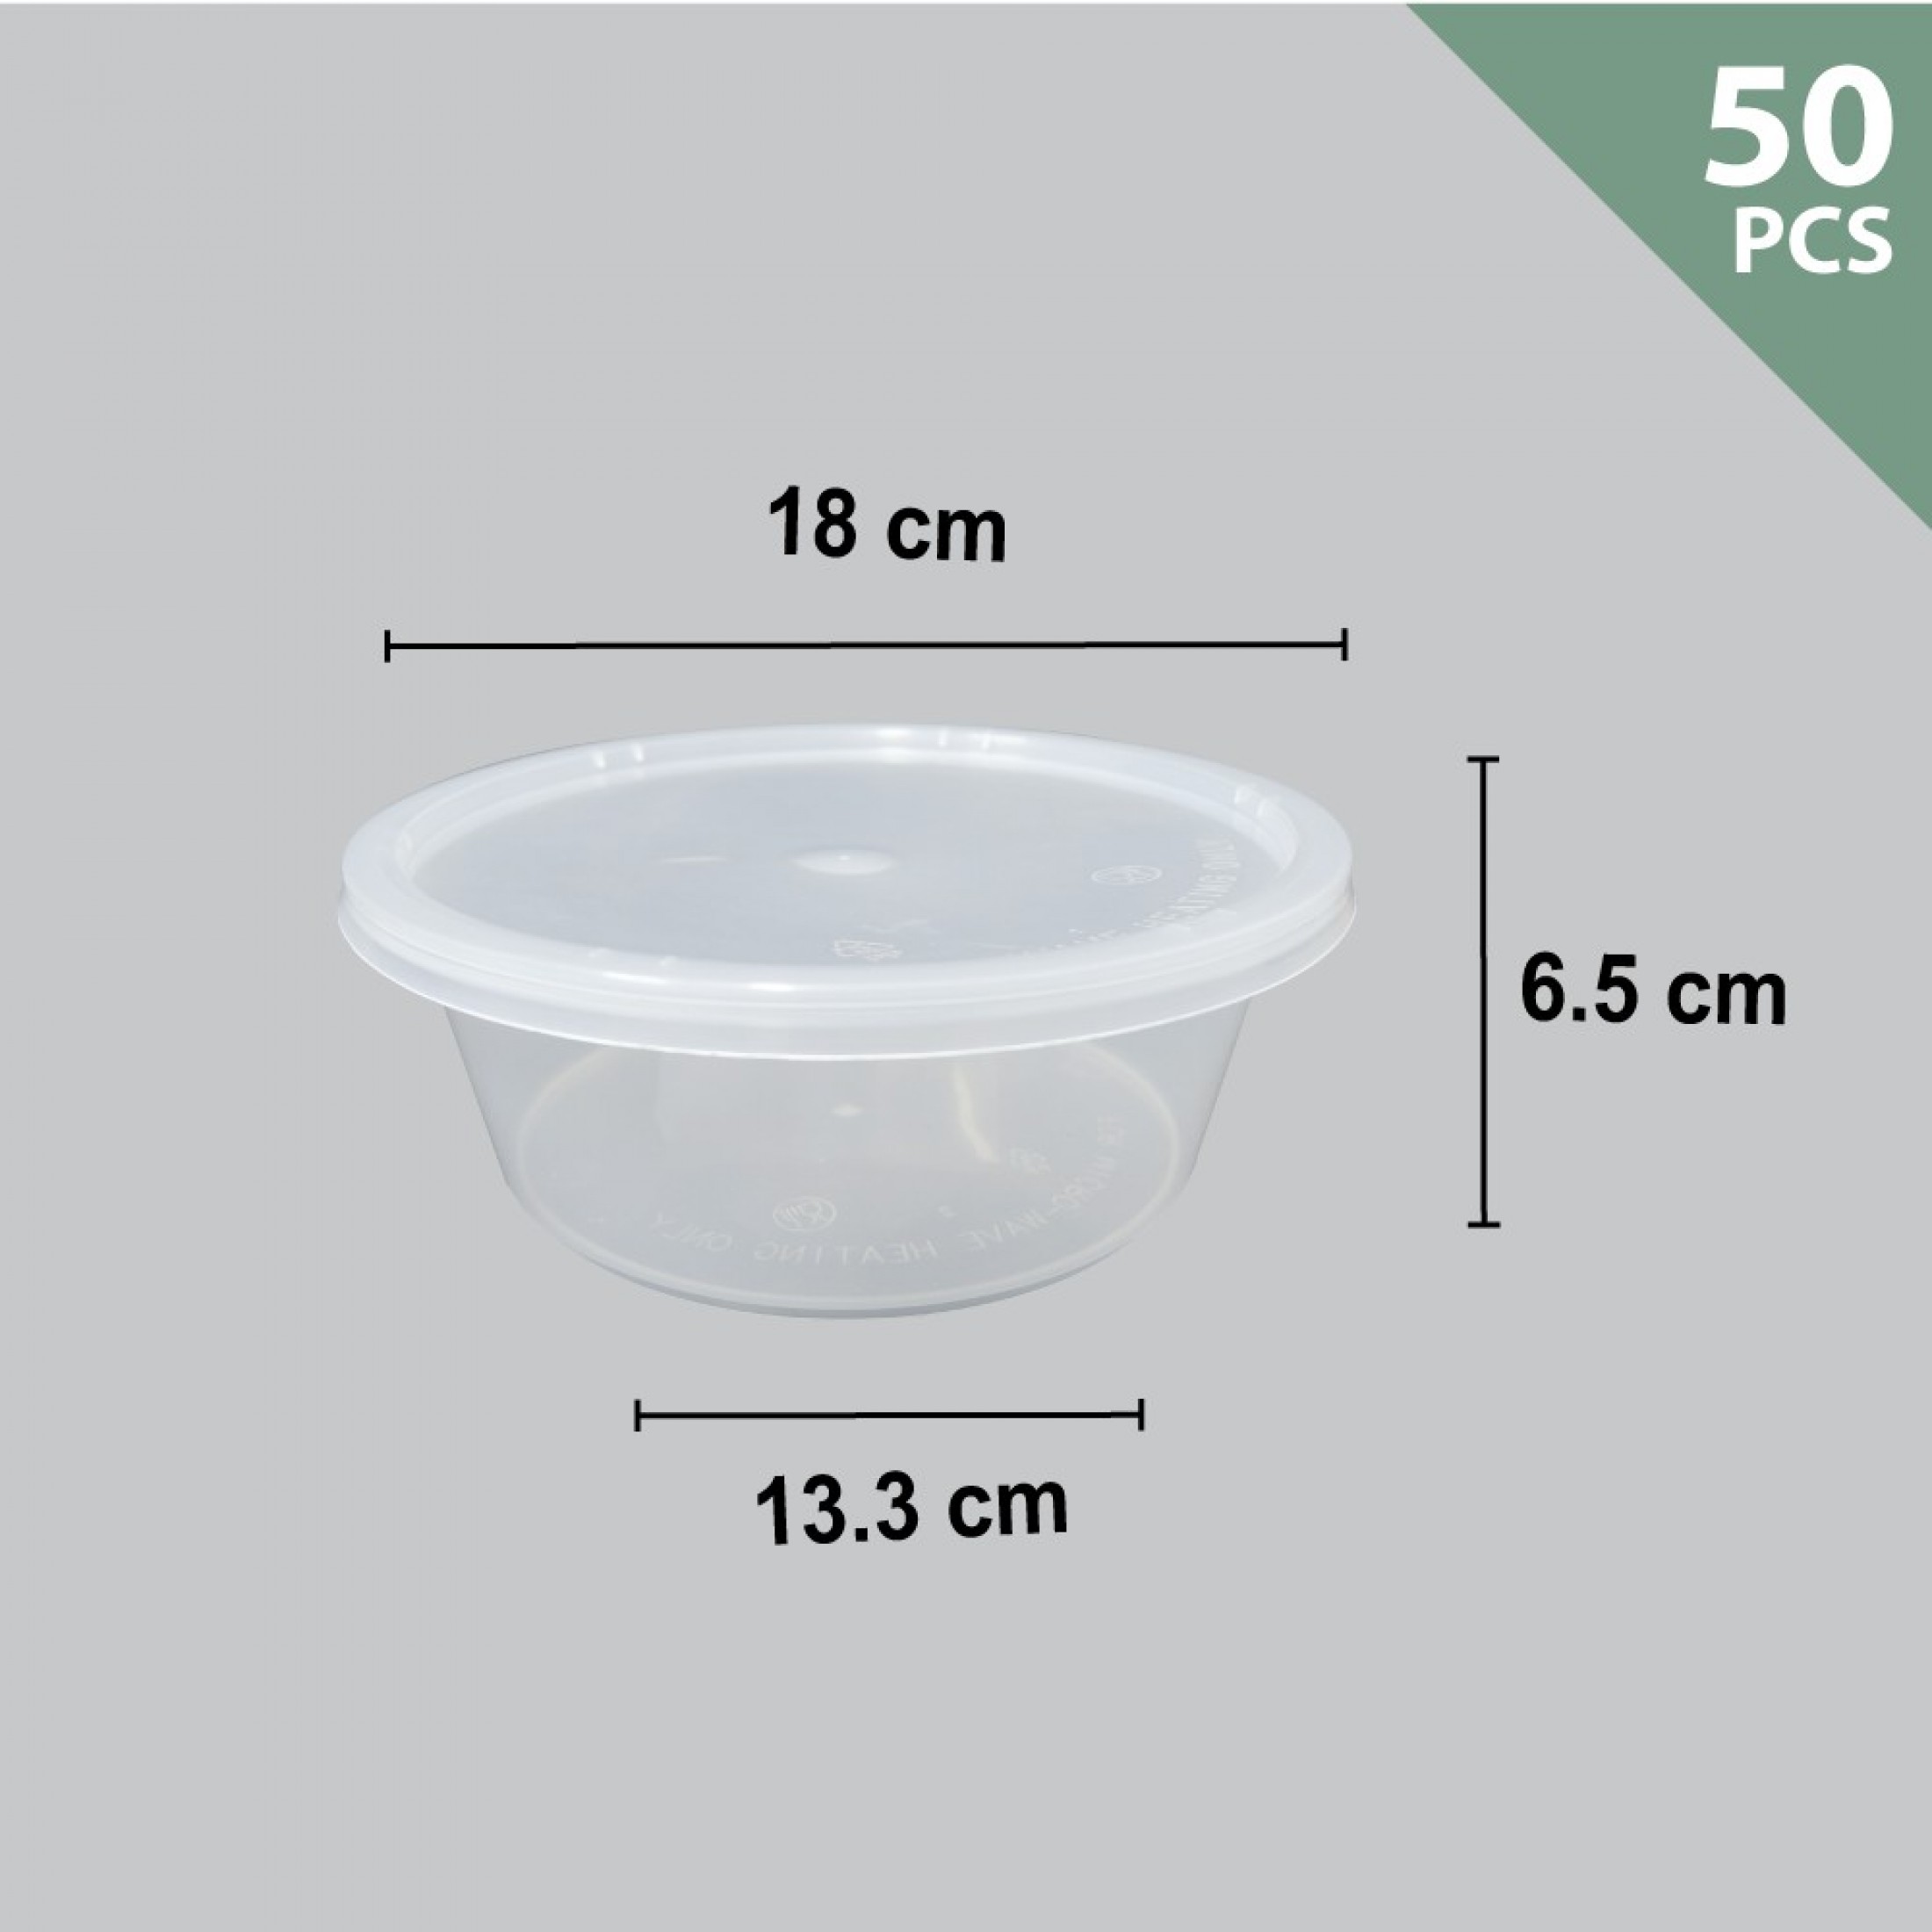 PLASTIC CONTAINER T1200 (ROUND) (50'S) - Peng Kee Enterprise Sdn Bhd ...